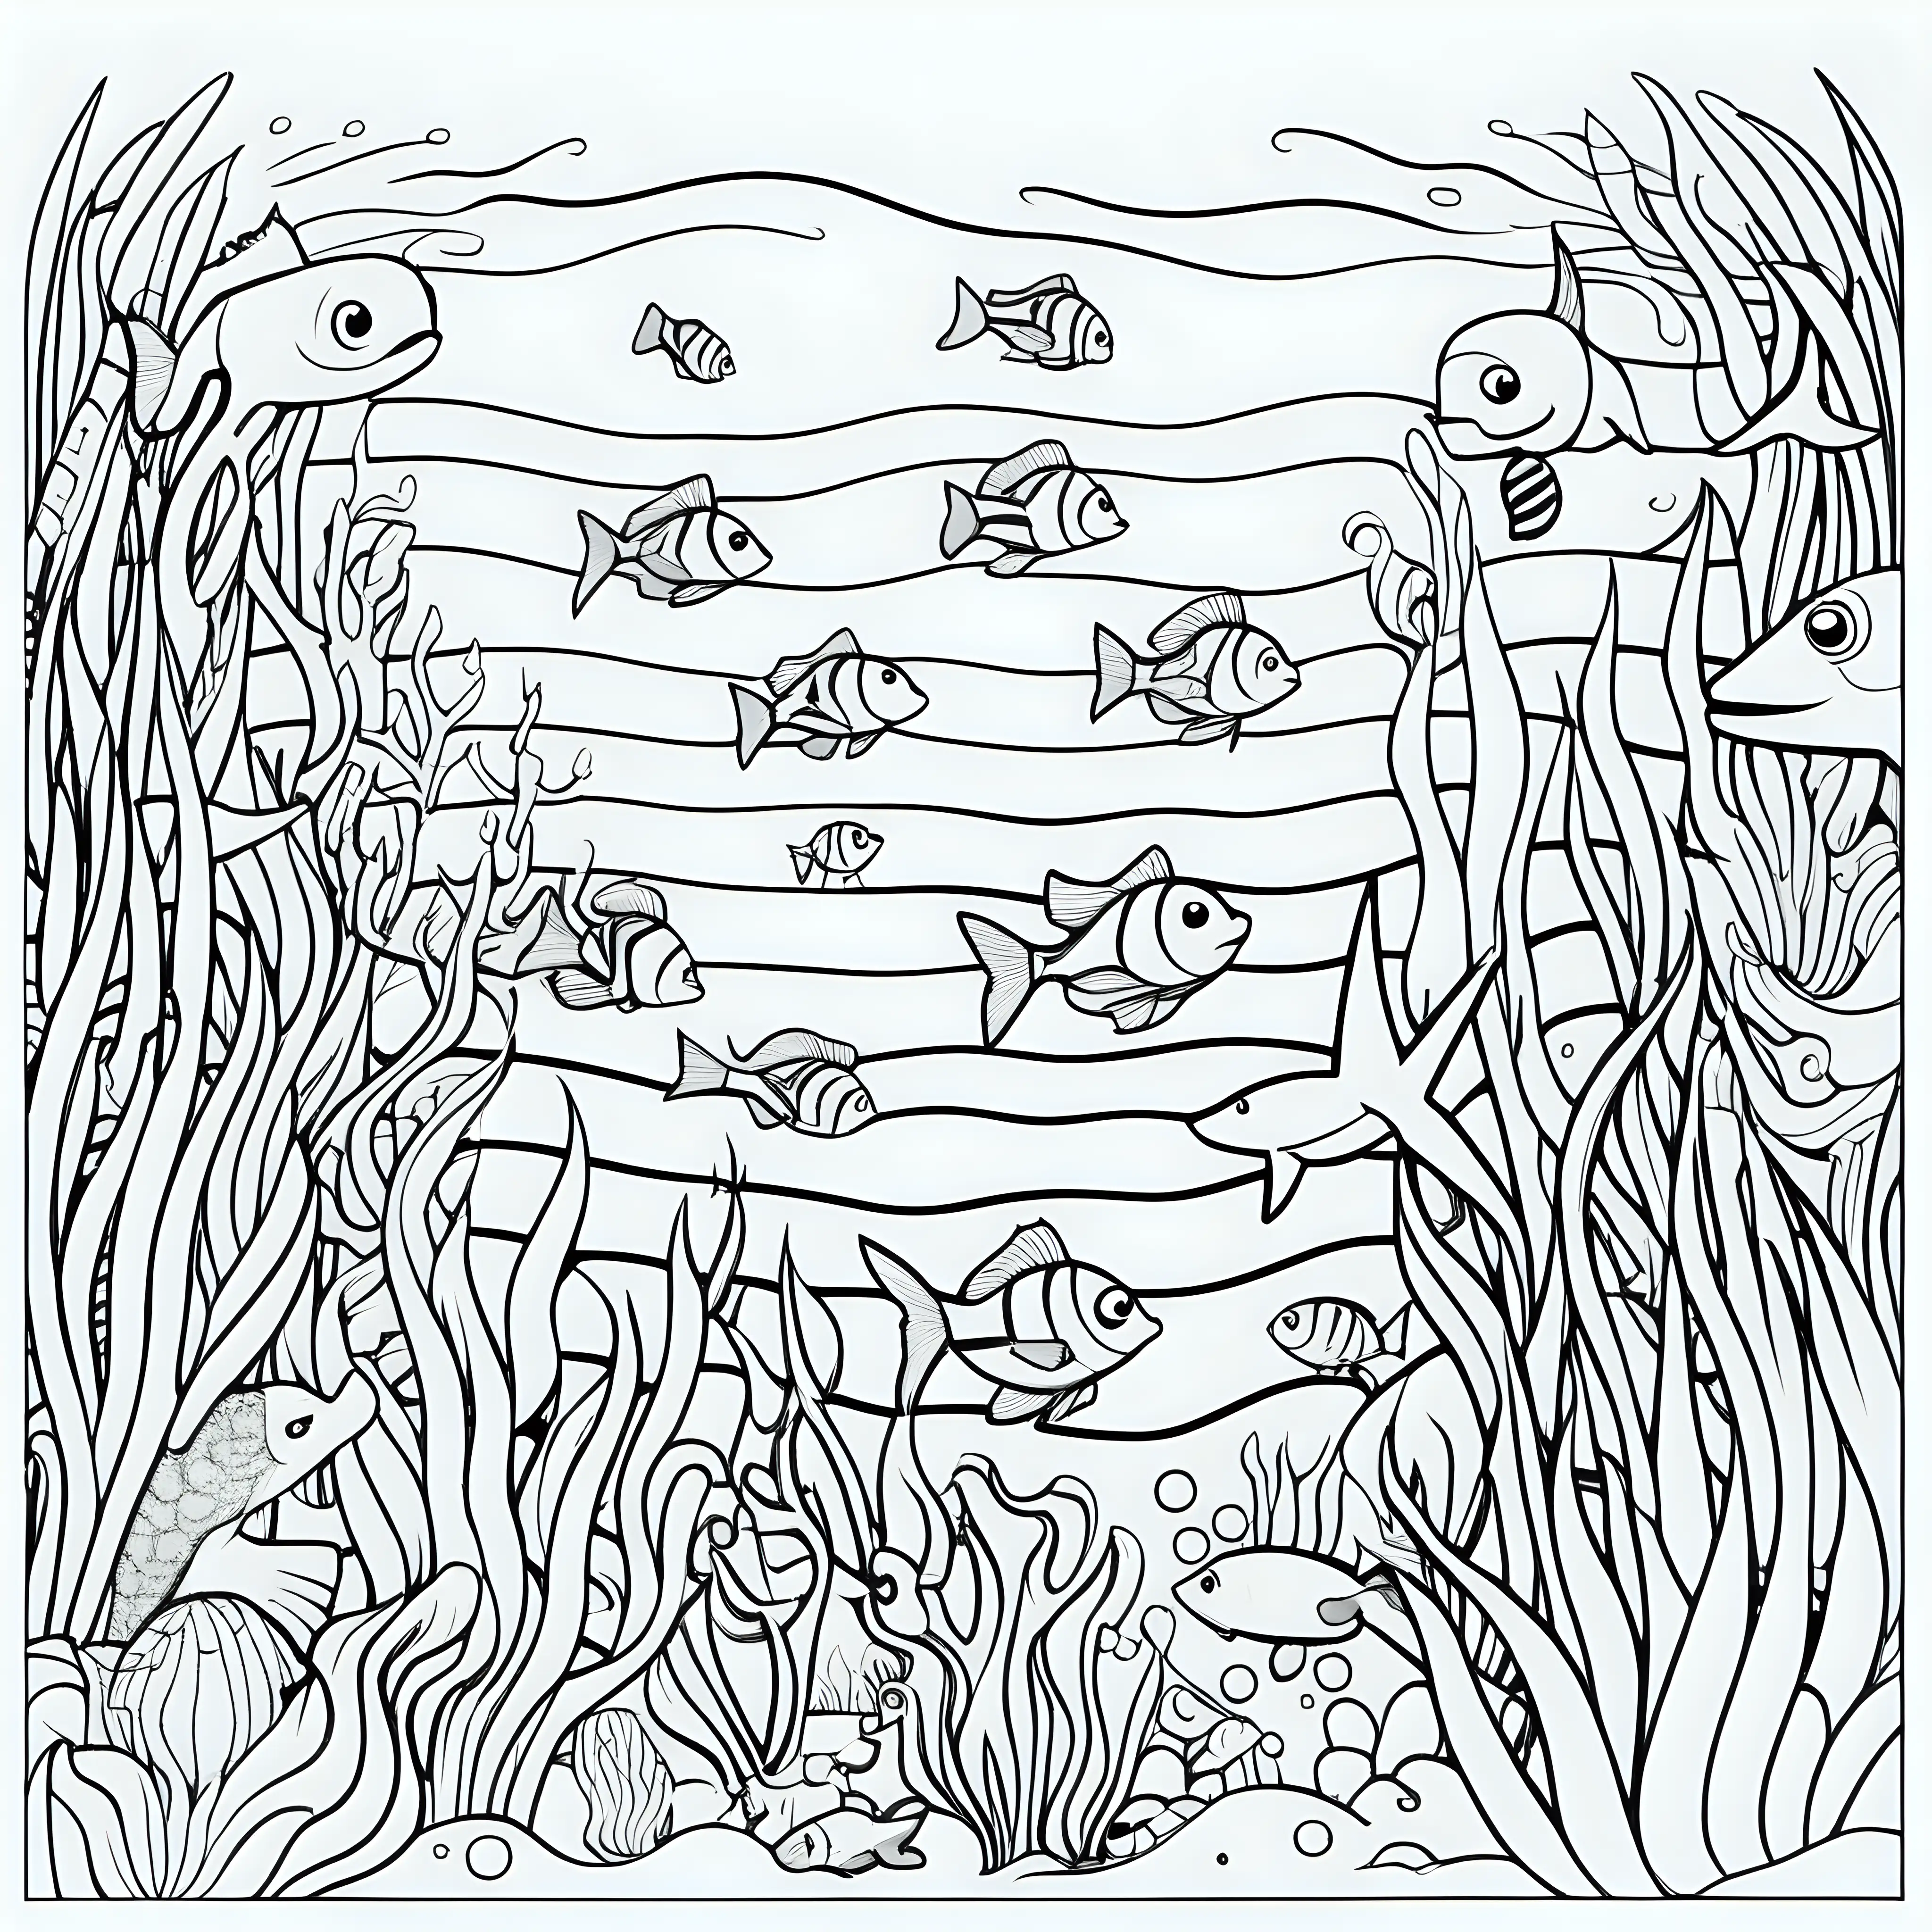 Simple black line under the sea colouring page for children